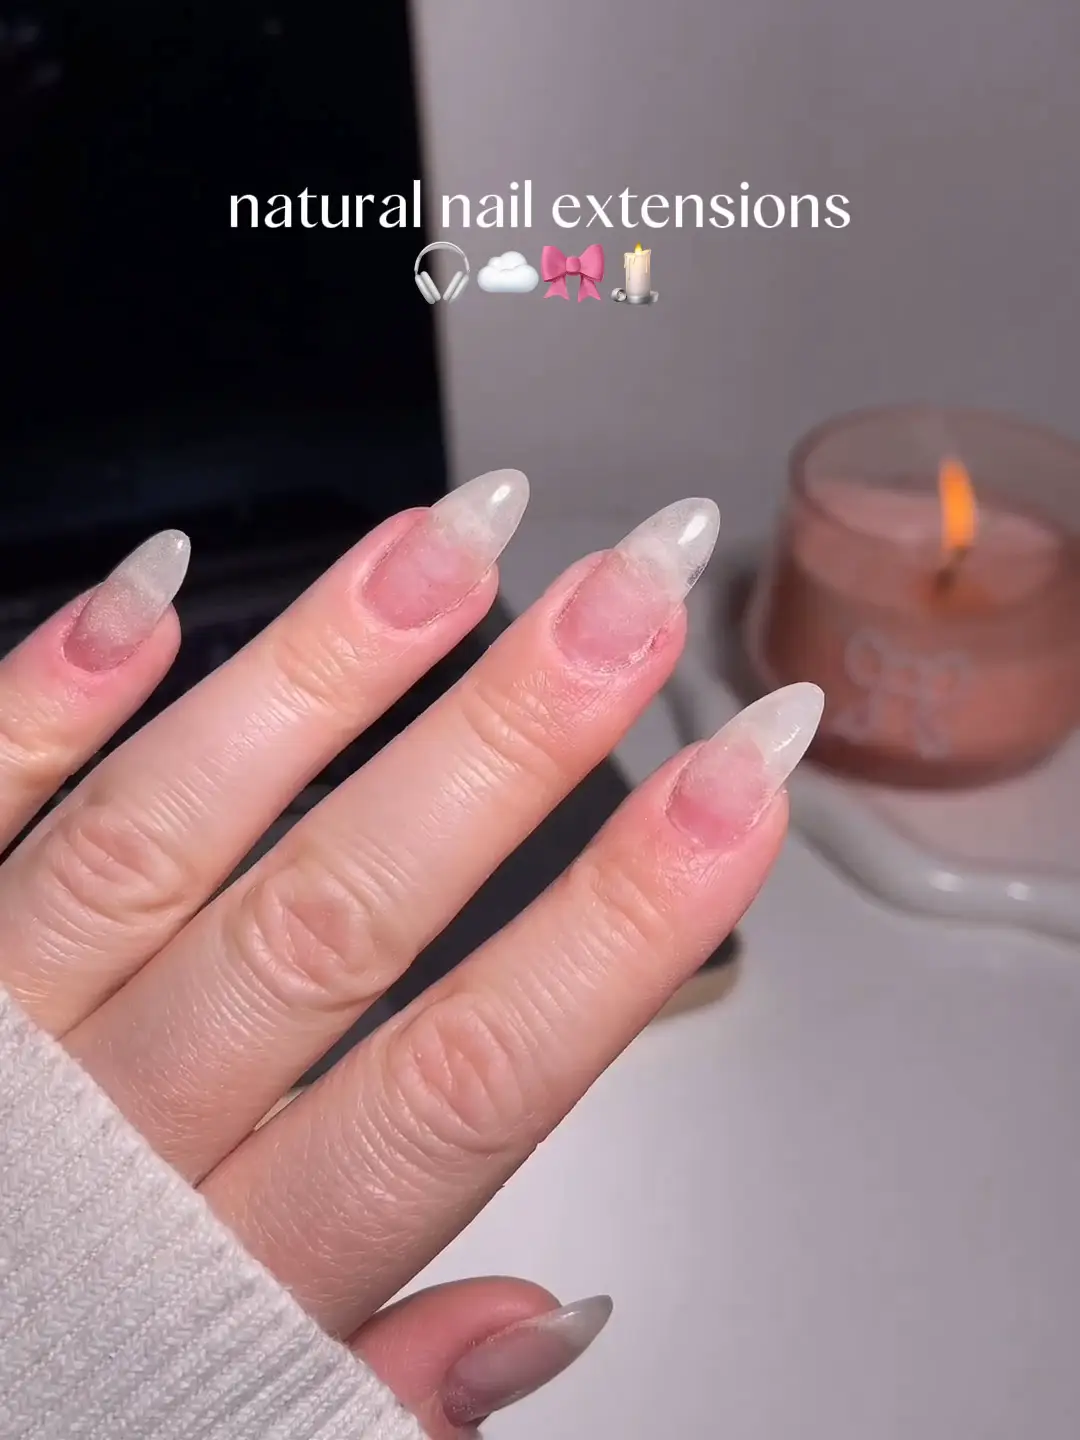 The Hyperrealistic Manicure Offers A Natural Nail Without Having To Grow  Them Out